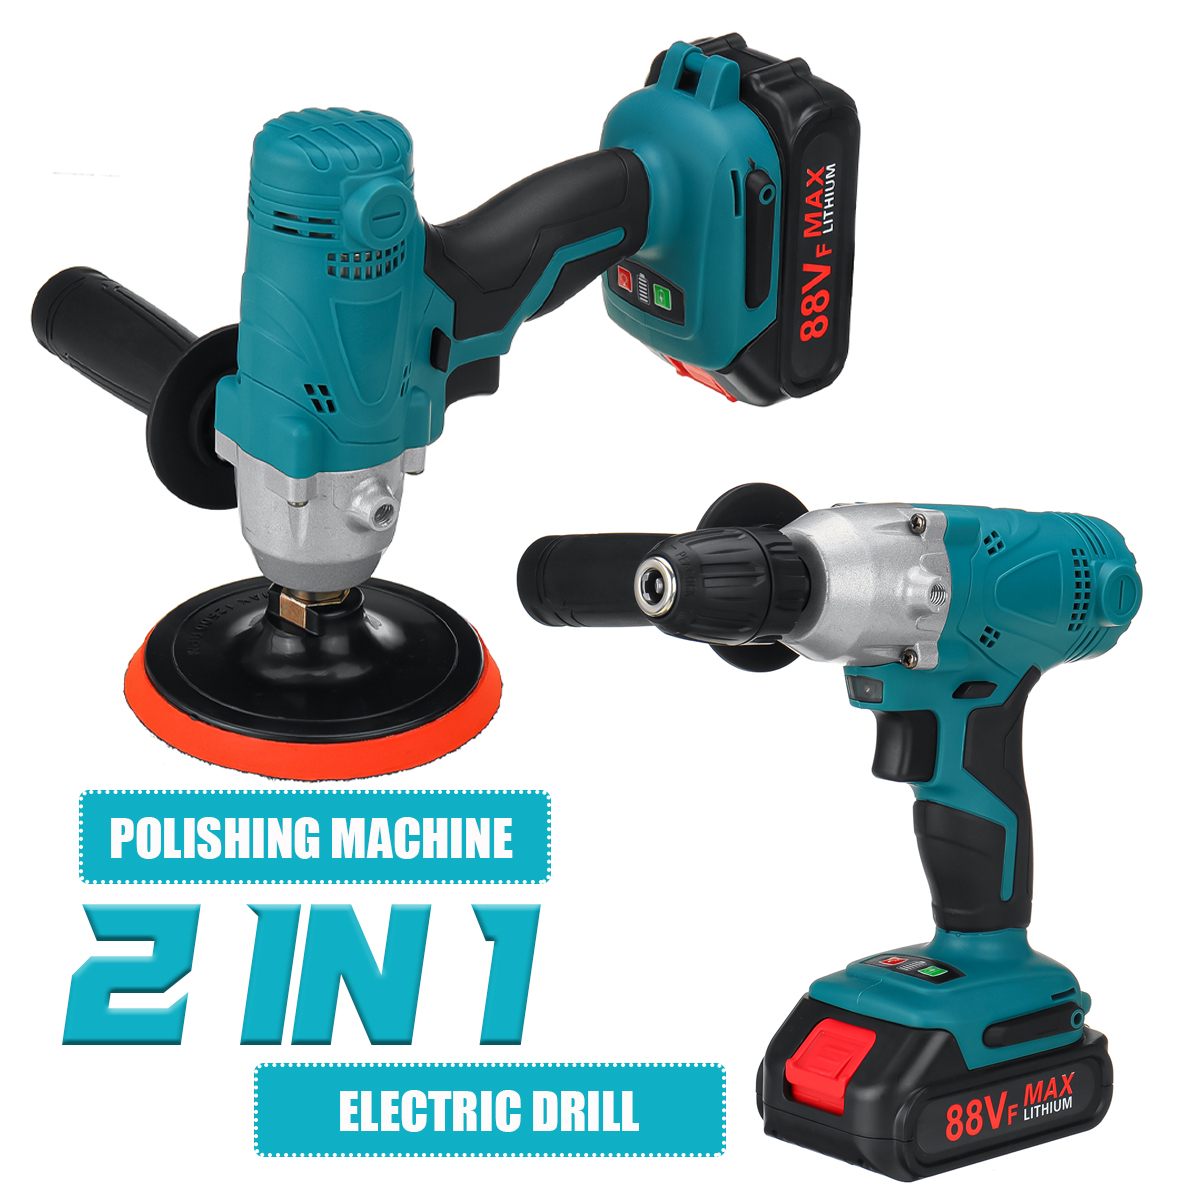 2-In-1-Polisher-Drill-Cordless-Electric-Drilling-Polishing-Machine-Car-Polisher-Power-Tool-Converter-1889909-3